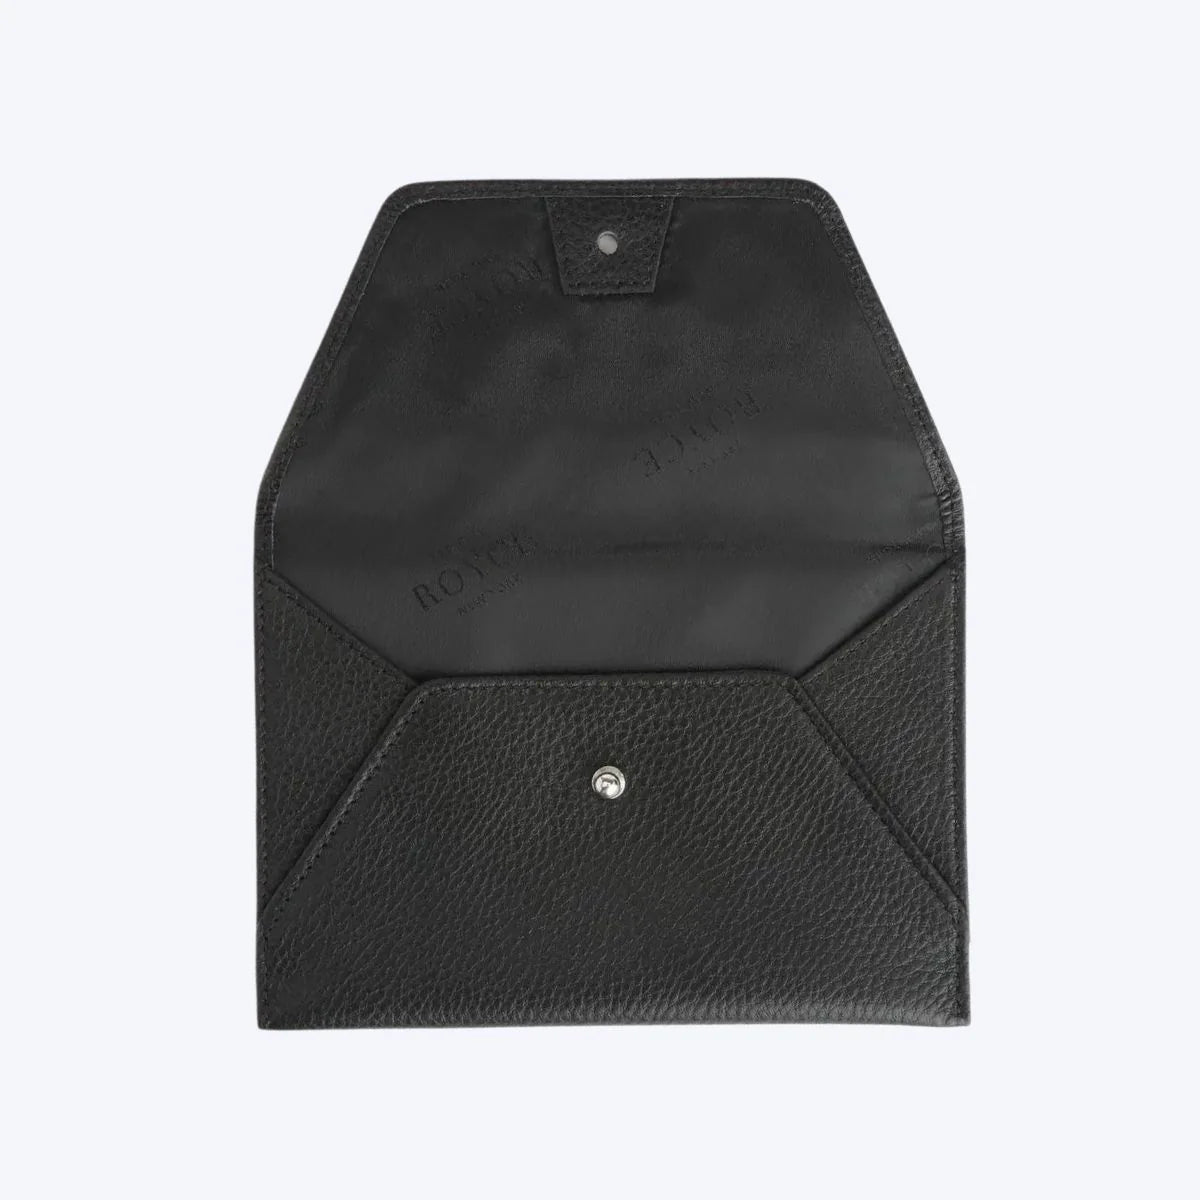 Royce passport and travel envelope in black leather